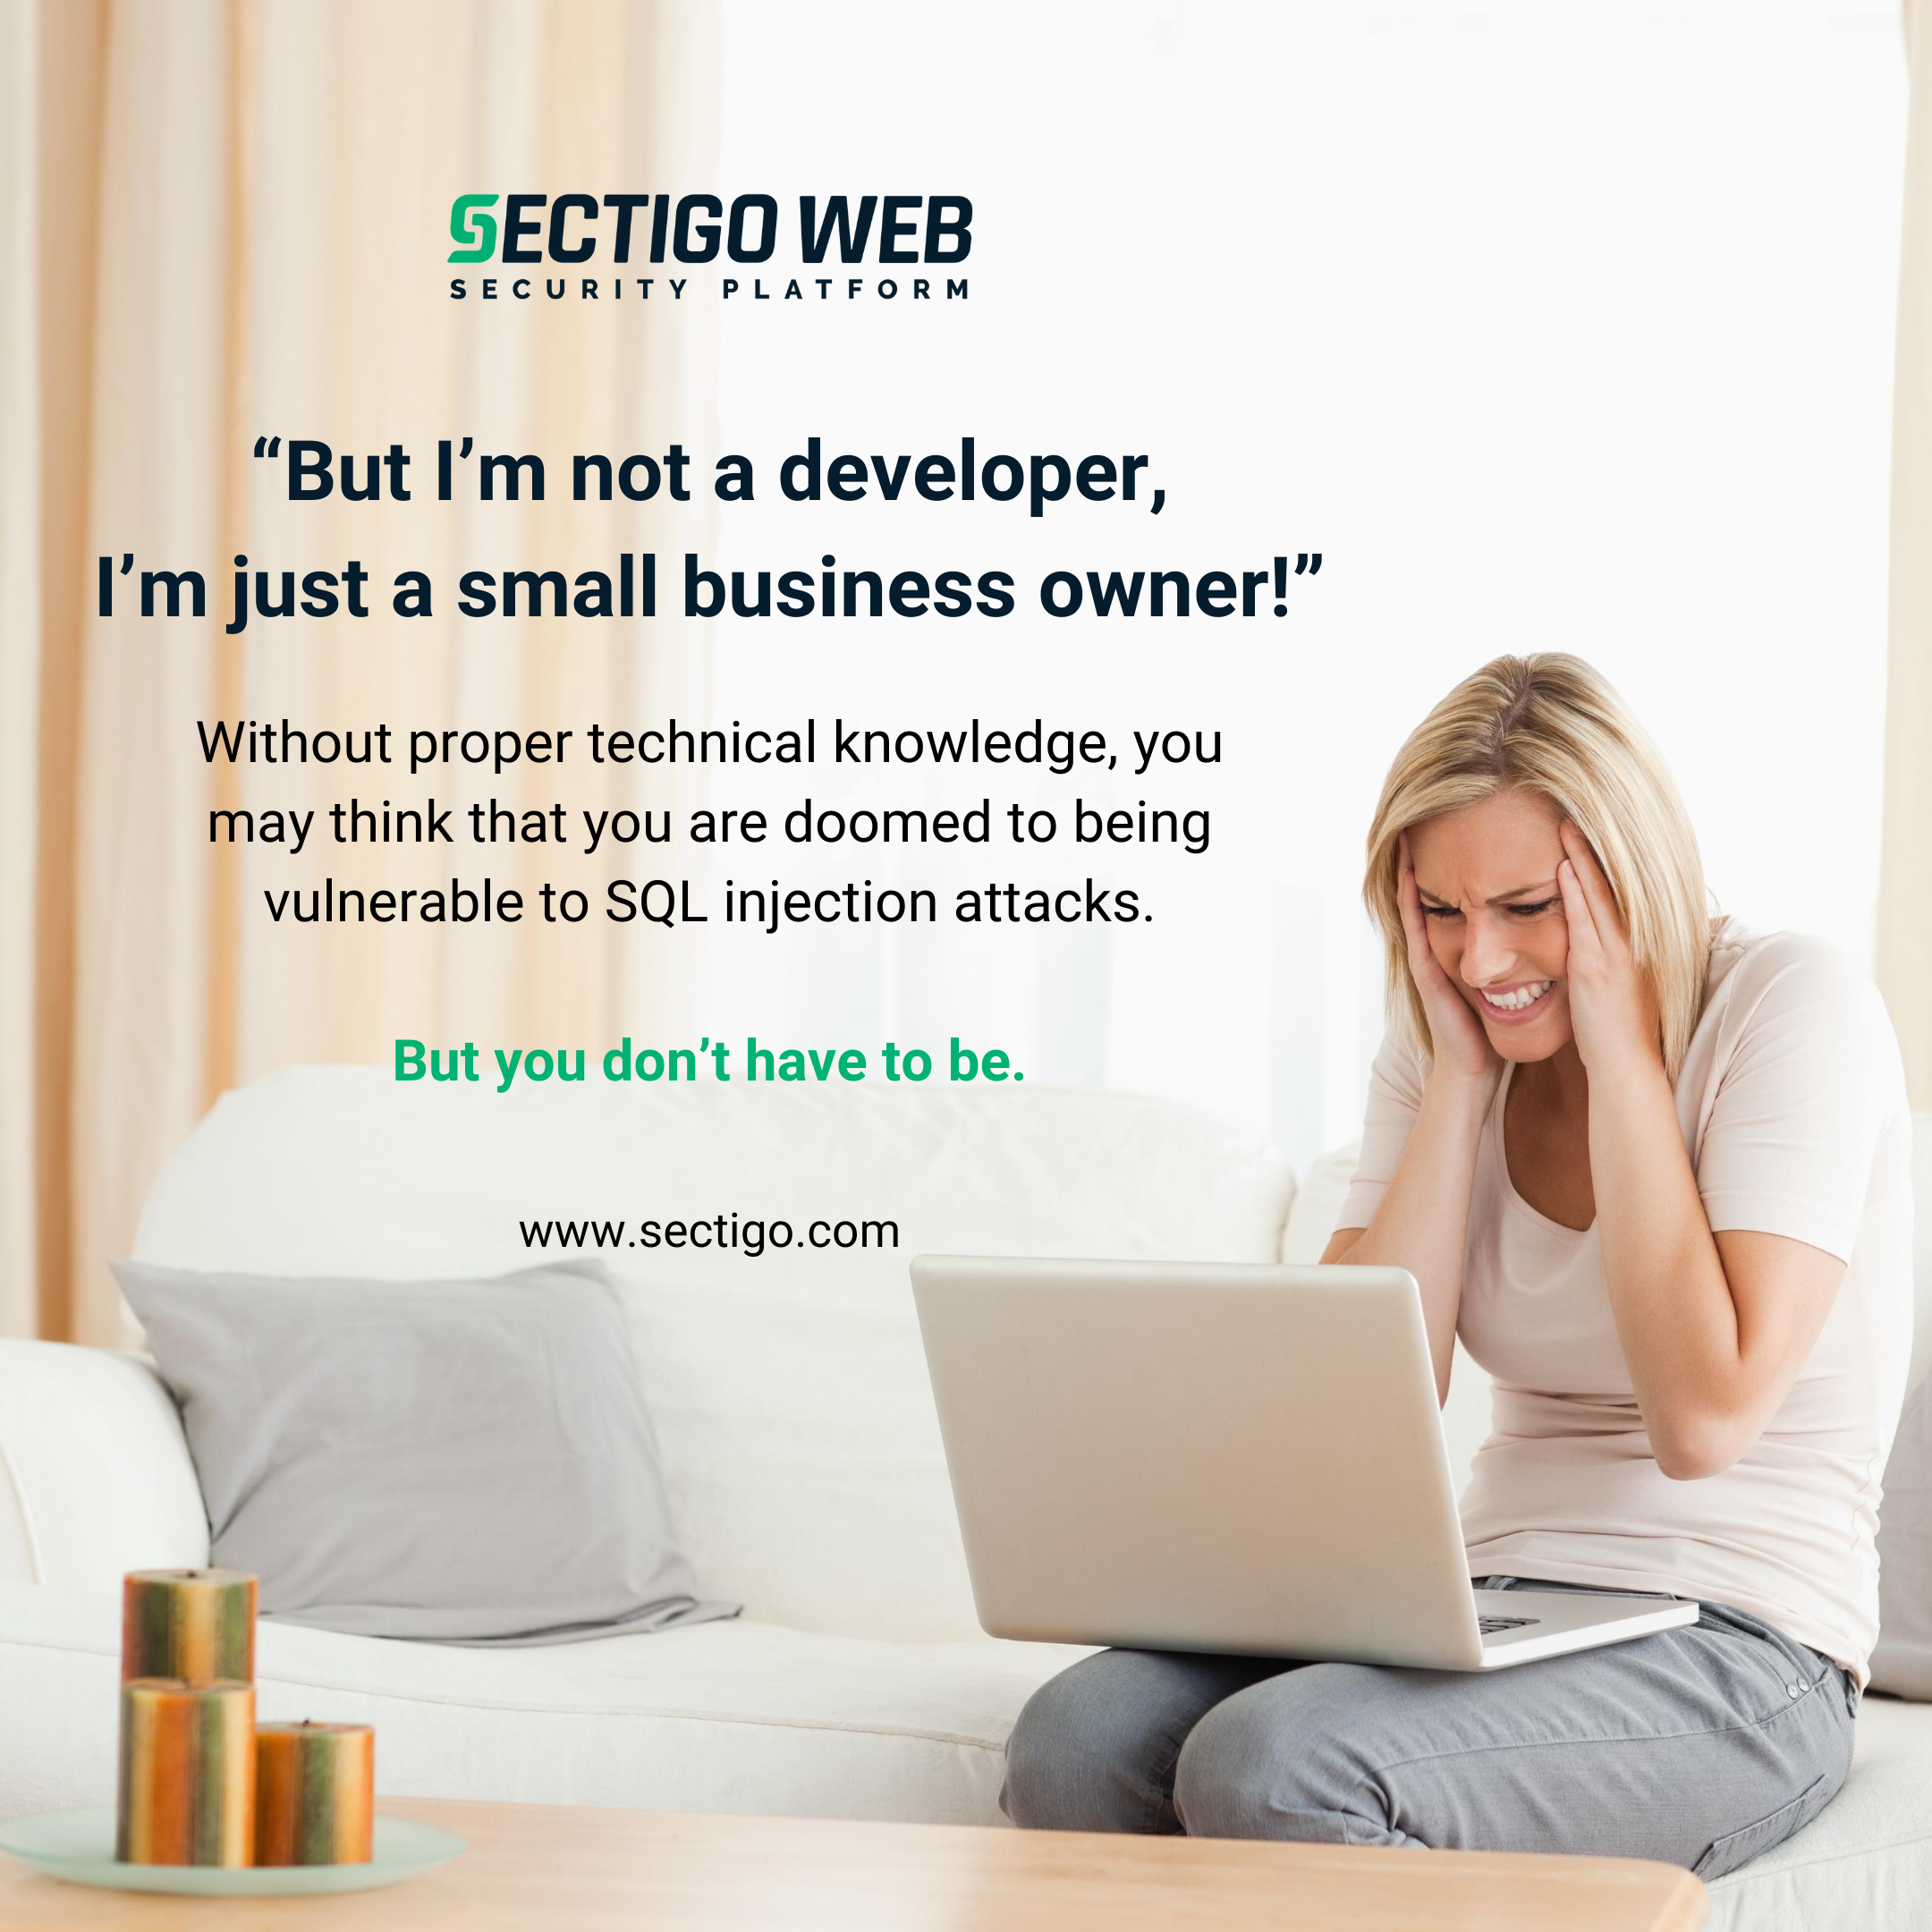 “But I’m not a developer, I’m just a small business owner!”